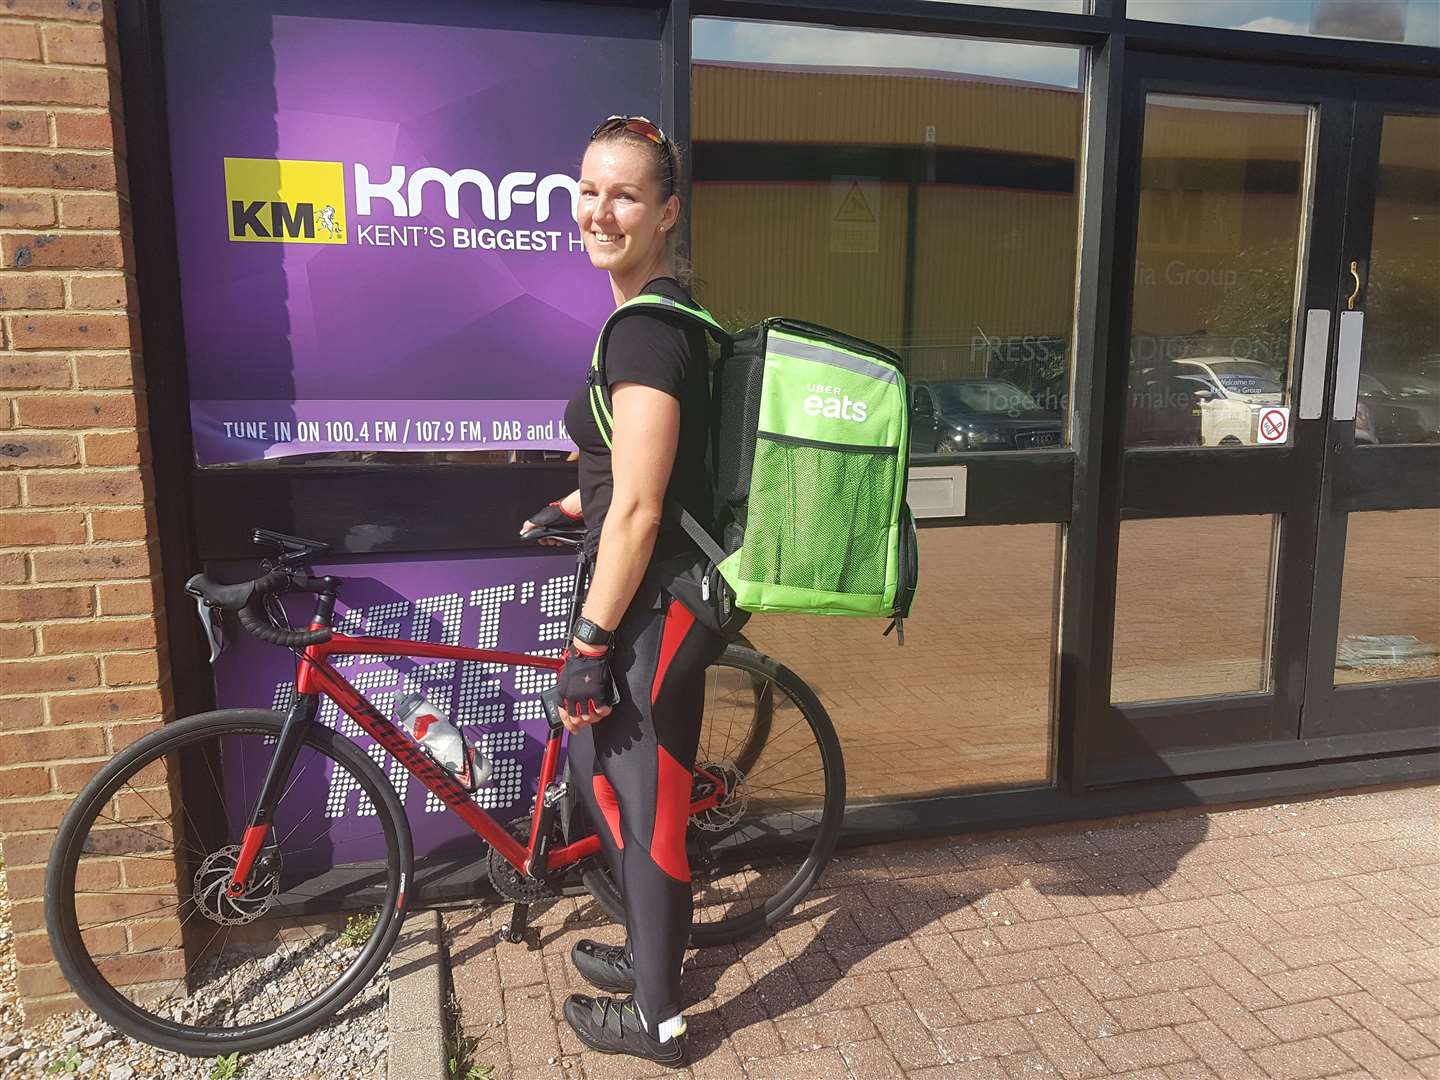 The first delivery was made to kmfm in Medway City Estate